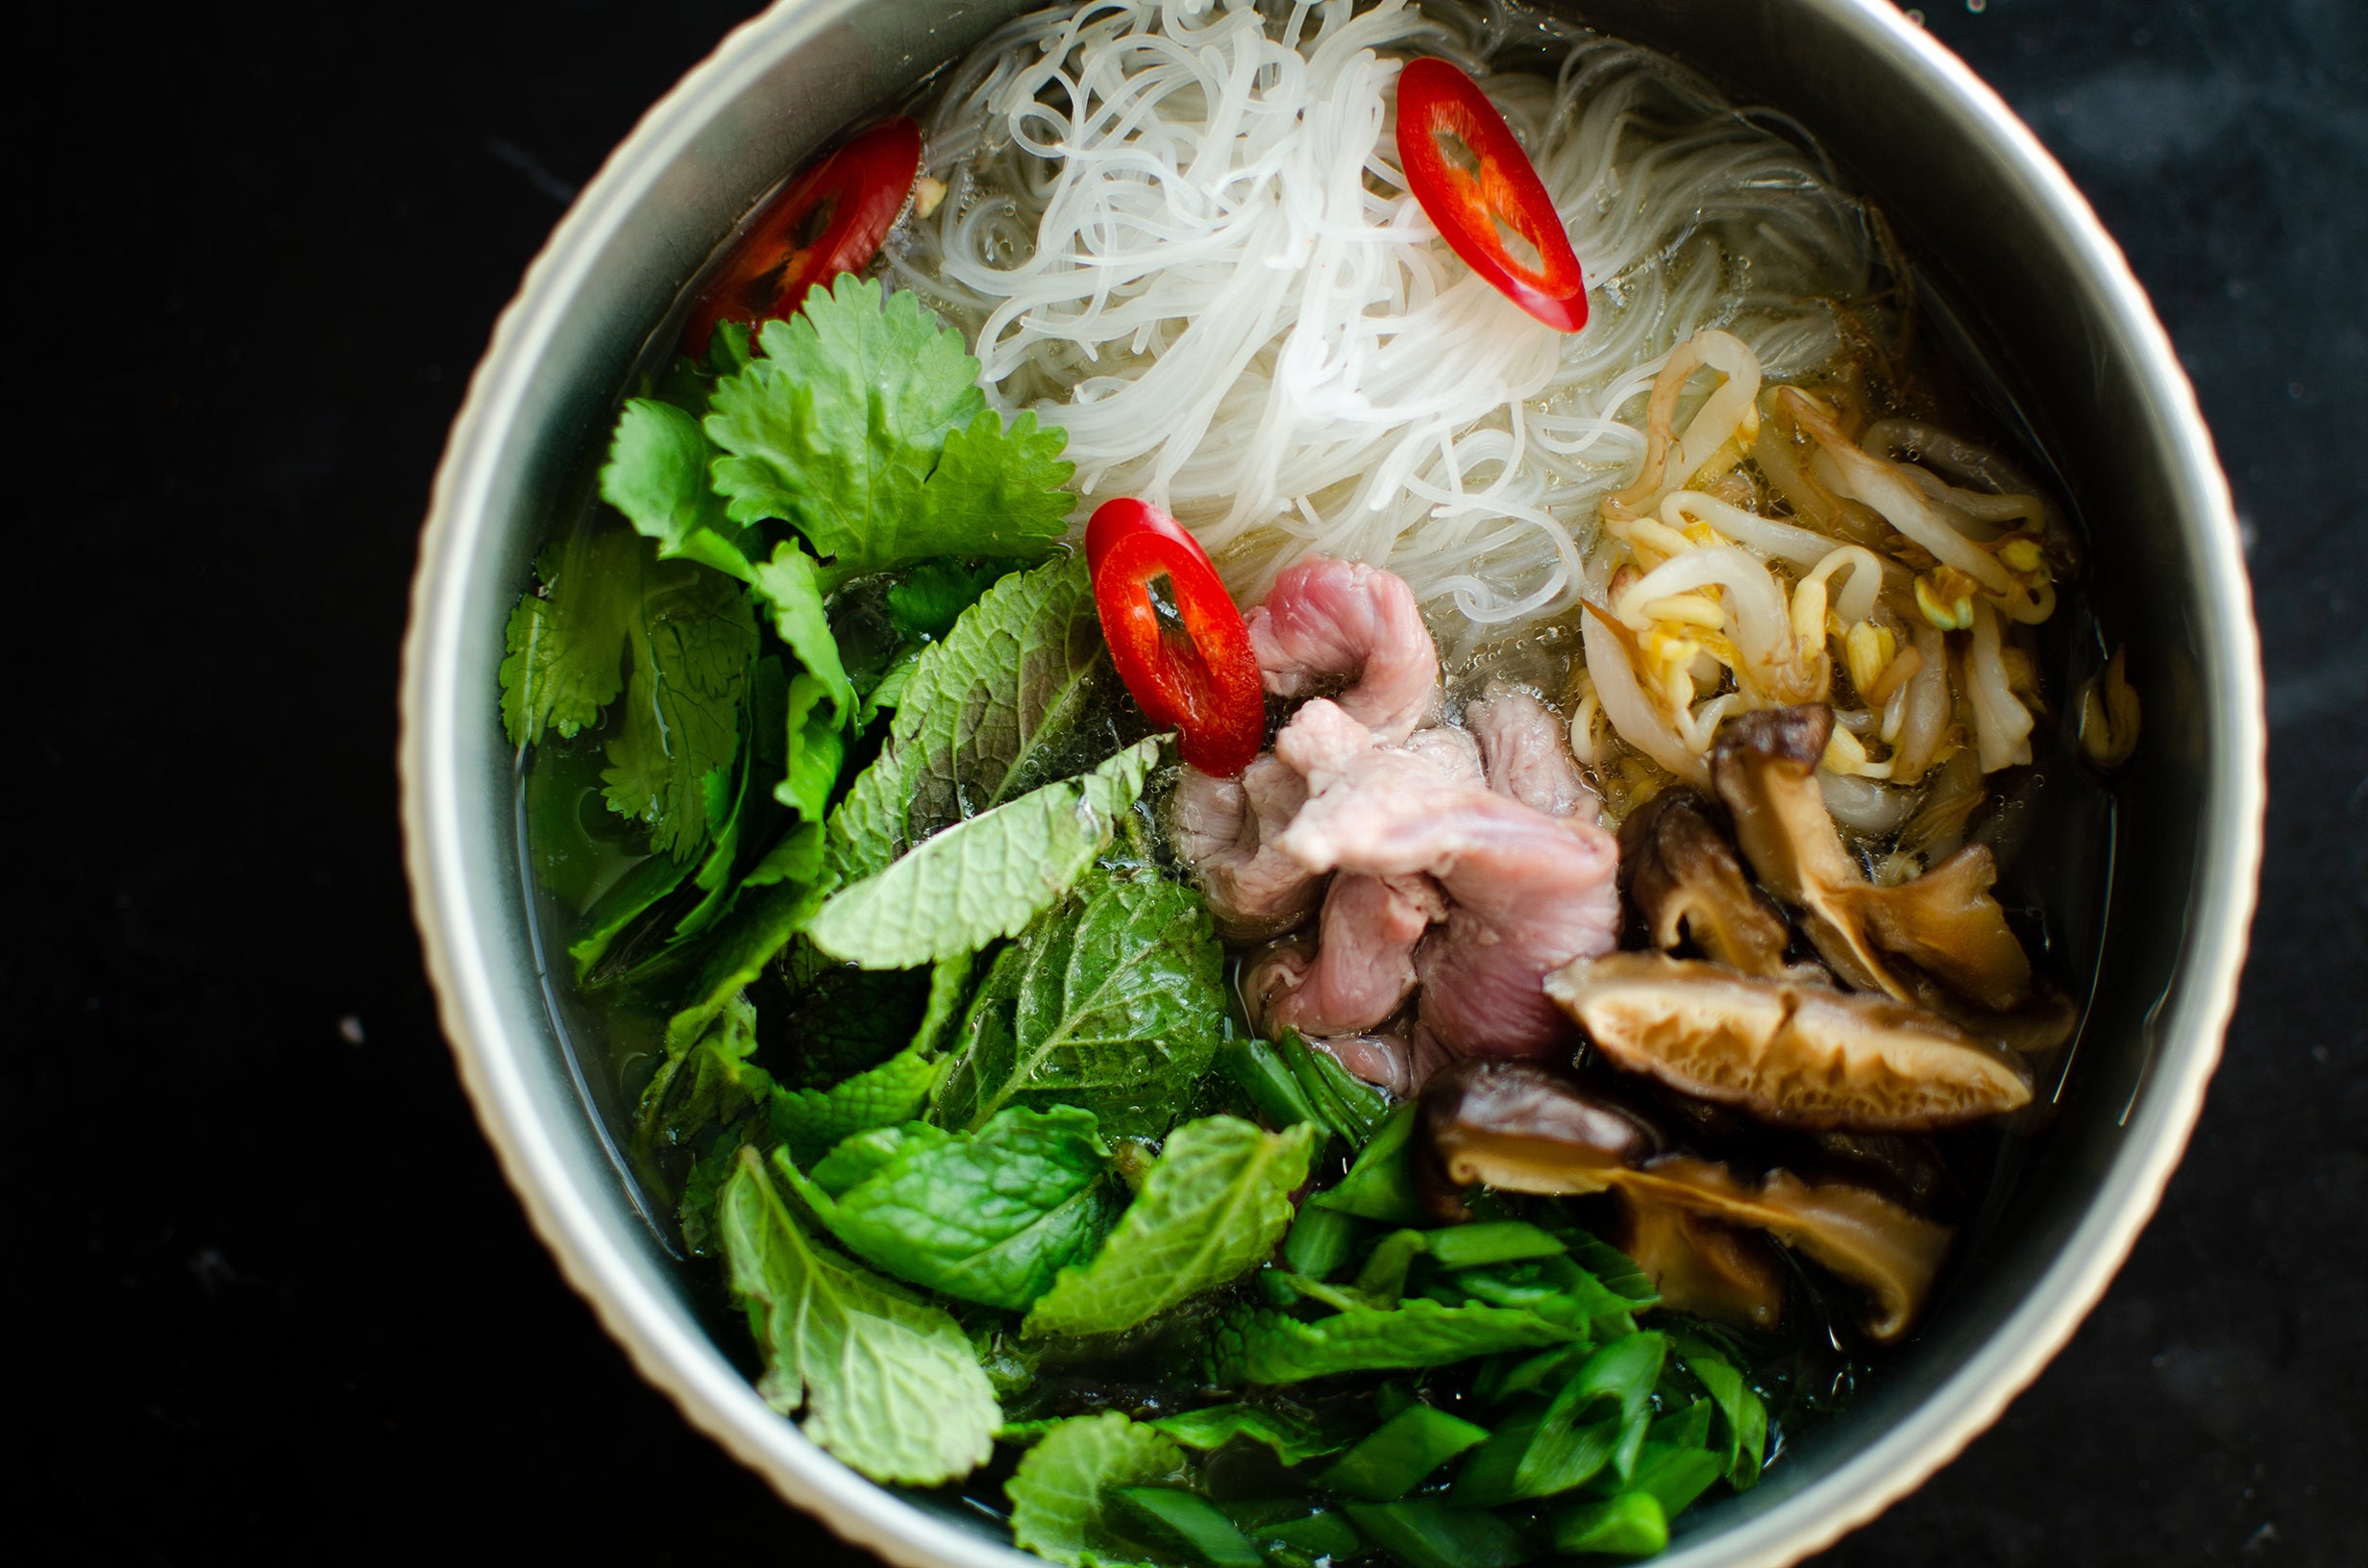 Vietnamese Pho is a fragrant and flavorful noodle soup made with beef or chicken broth, rice noodles, herbs, and spices, including star anise.